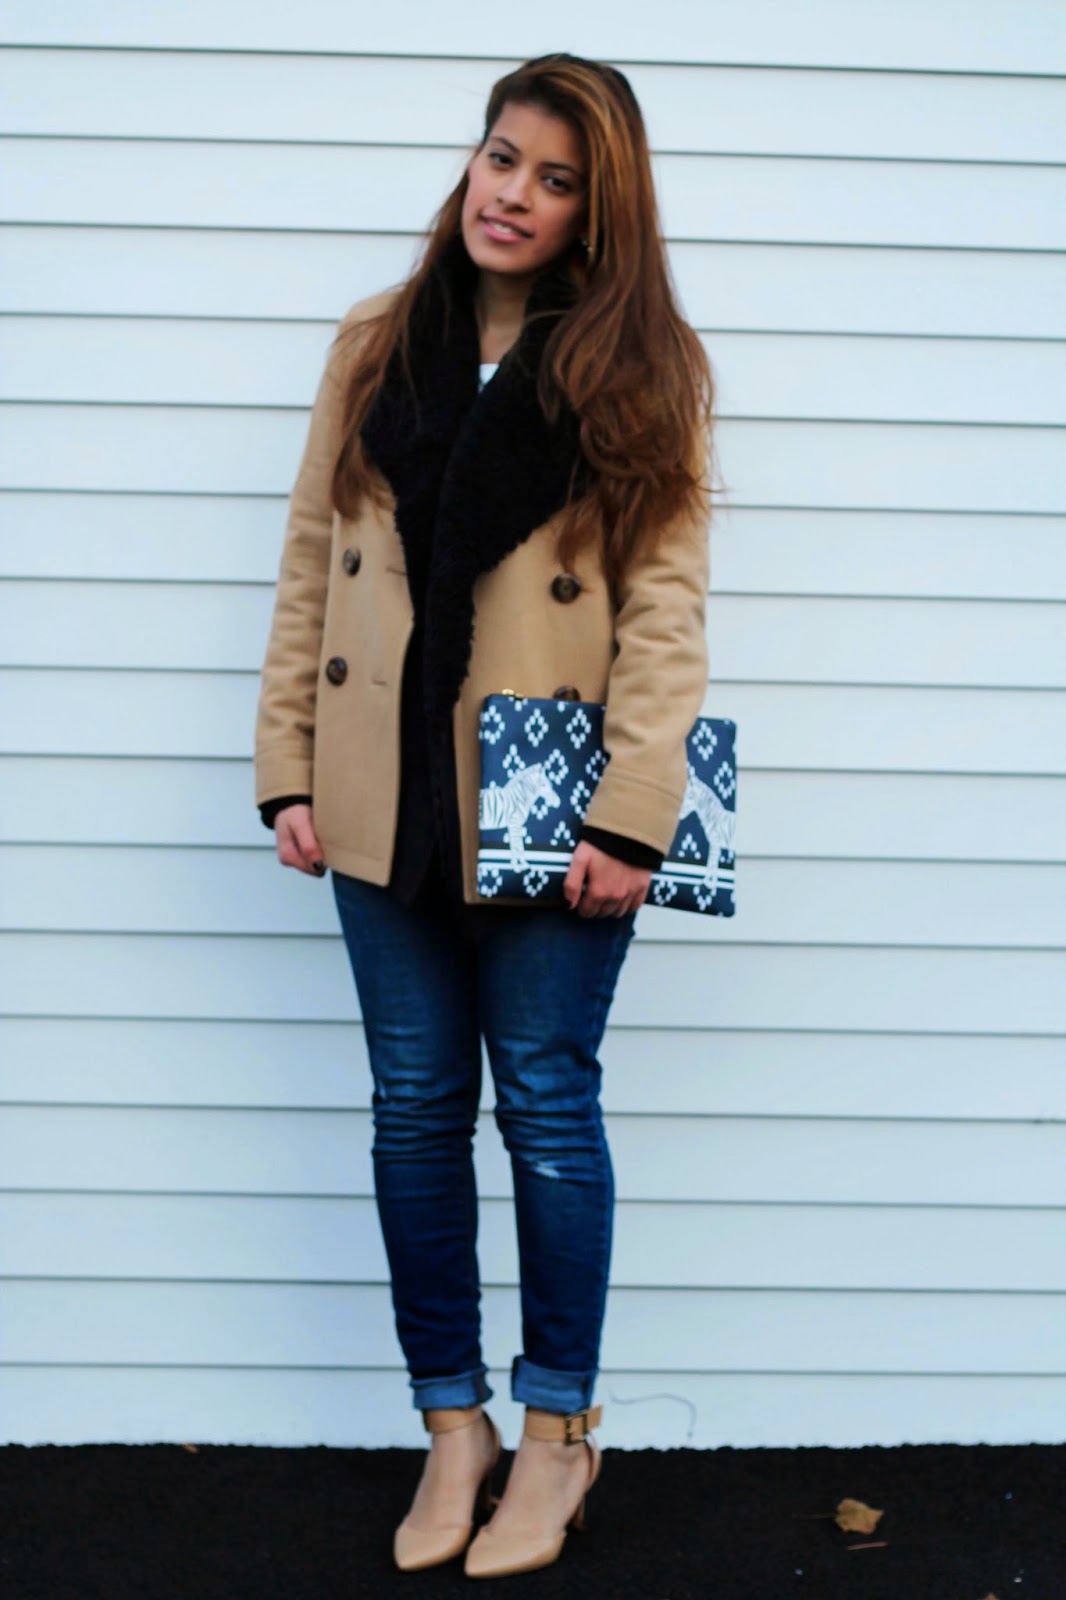 old navy, pea coat, camel, nine west, nude, ankle-strap heels, ankle strap, joan vass, ro and de, distressed, wool, heels, c.wonder, zebra, clutch, pouch, faux fur, sweater, faux fur sweater, faux, outfit of the day, ootd, nordstrom rack, nordstrom, faux leather, leather, jeans, skinny jeans, rockstar, 